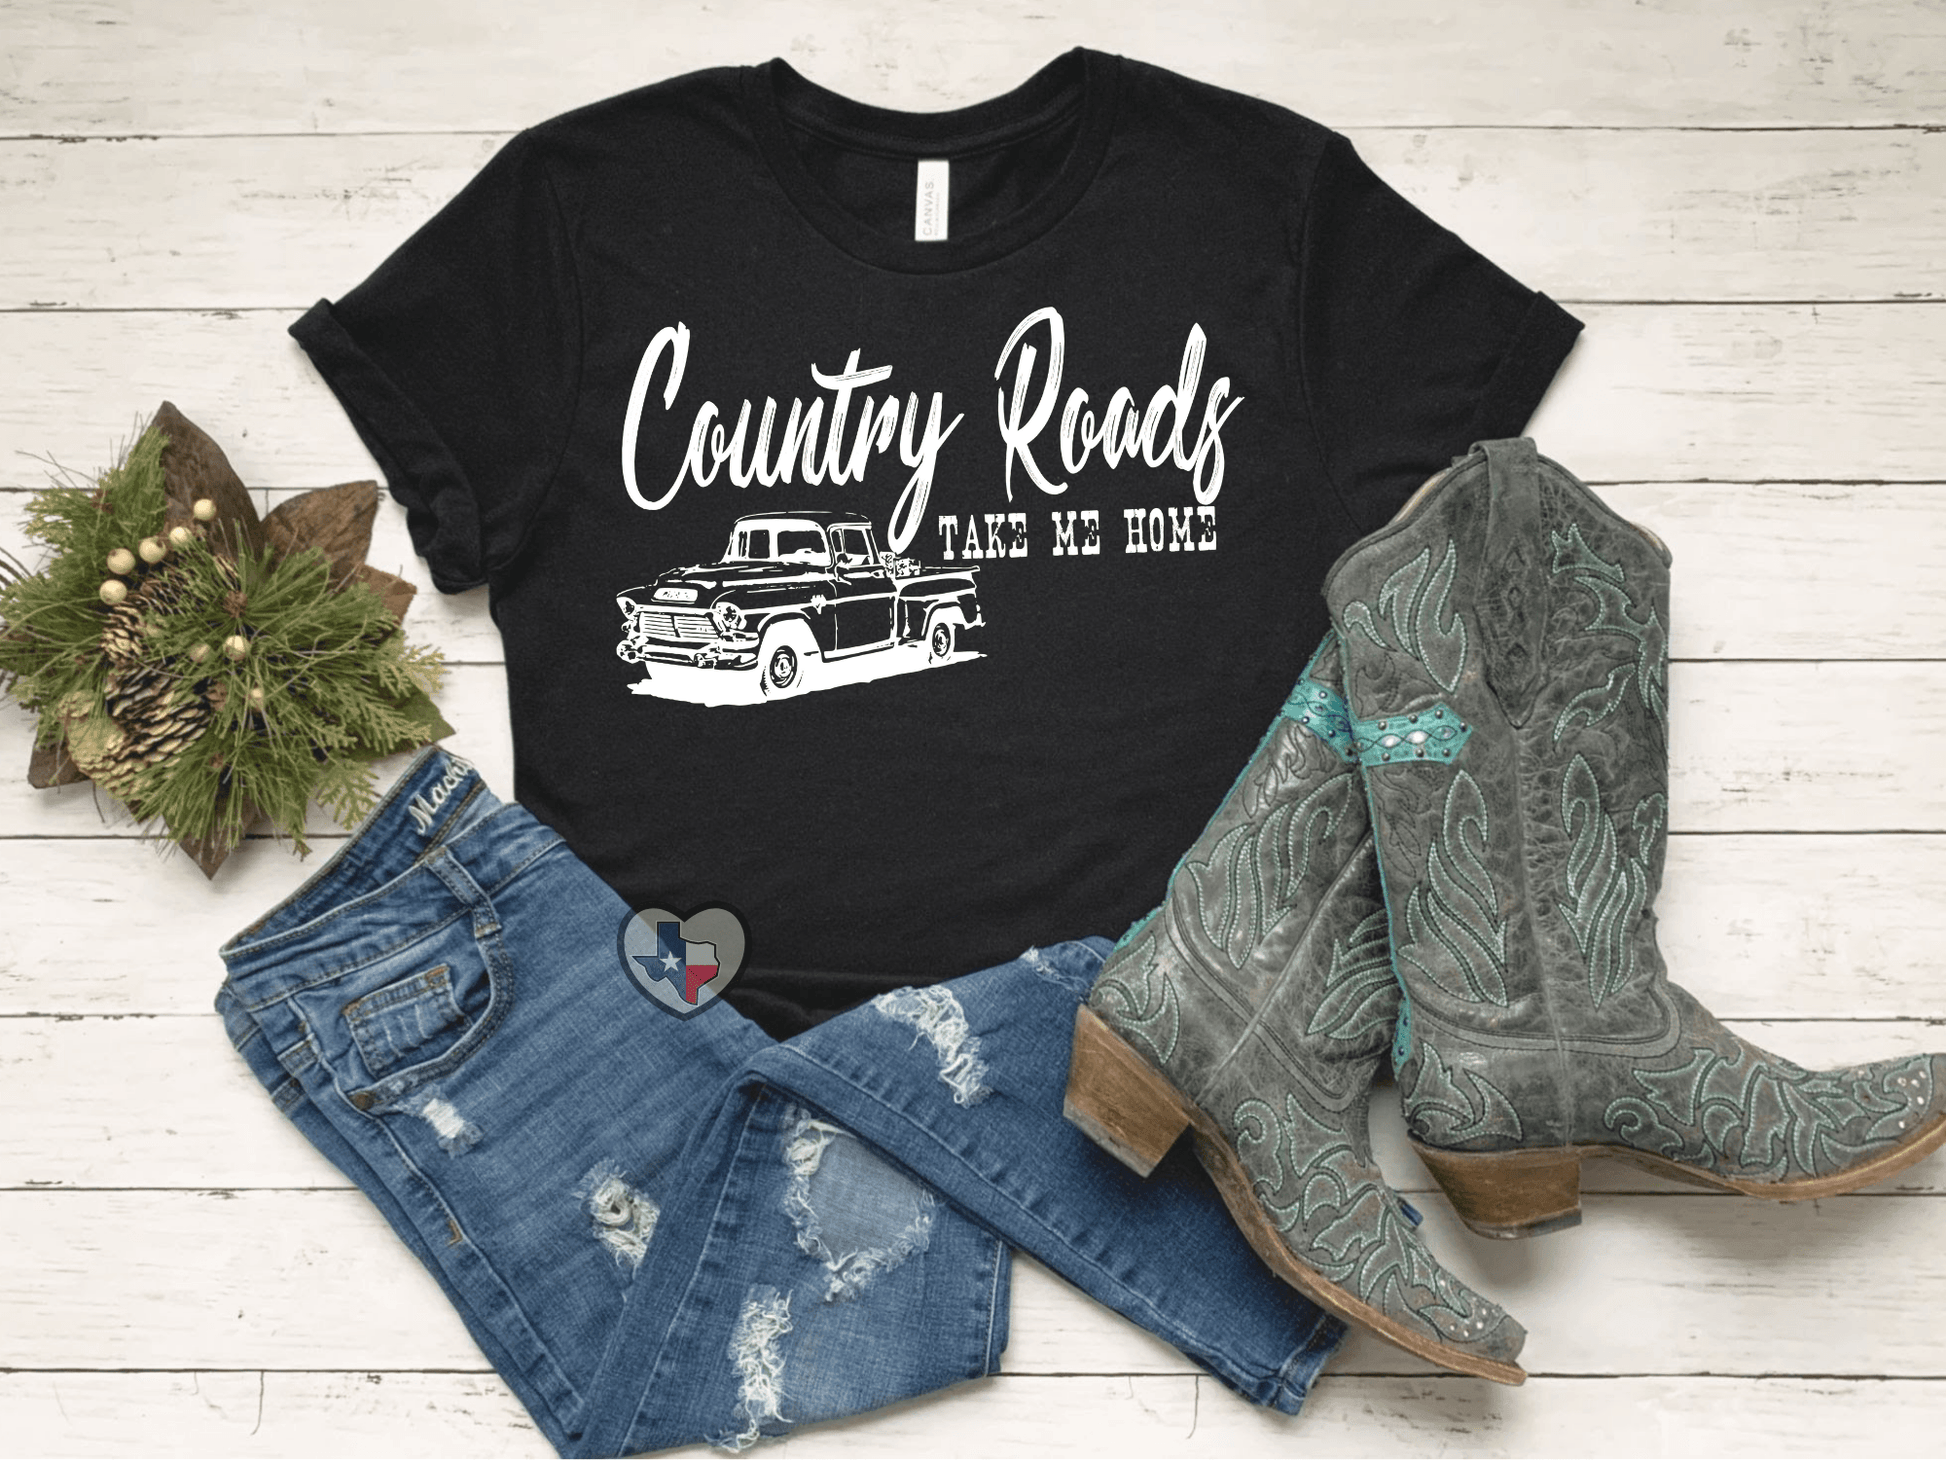 Country Roads Take Me Home - Texas Transfers and Designs